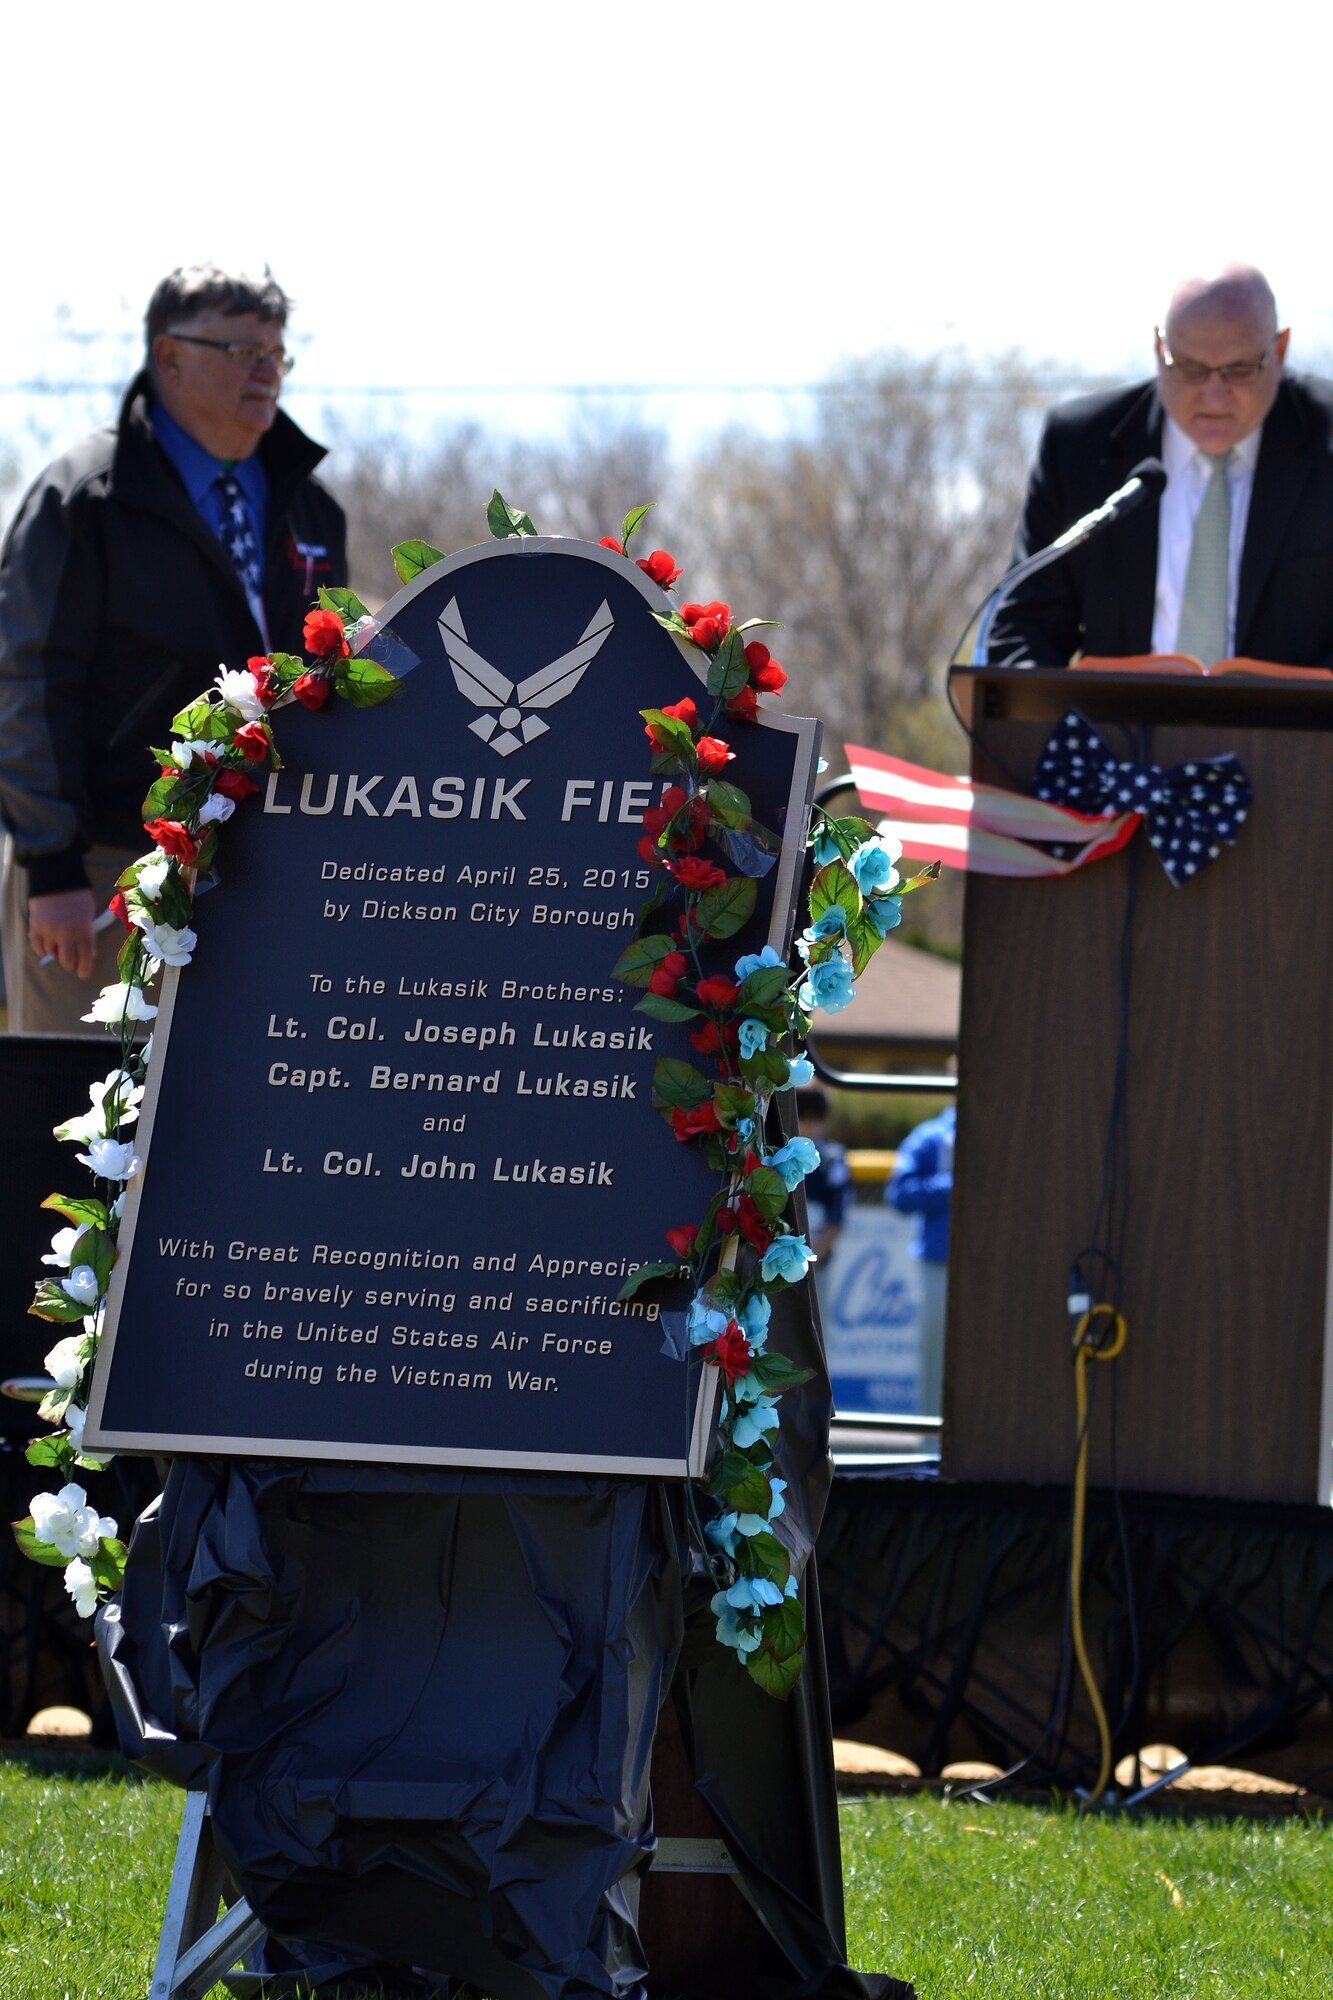 A dedication ceremony for the ball field April 25, 2015 at Dickson City, Pa.’s Crystal Park, pays honor to three Air Force aviator brothers from the town. The plaque bearing their names will be mounted appropriately on the flag pole beyond the center field fence. (U.S. Air National Guard photo by Master Sgt. Christopher Botzum/Released)